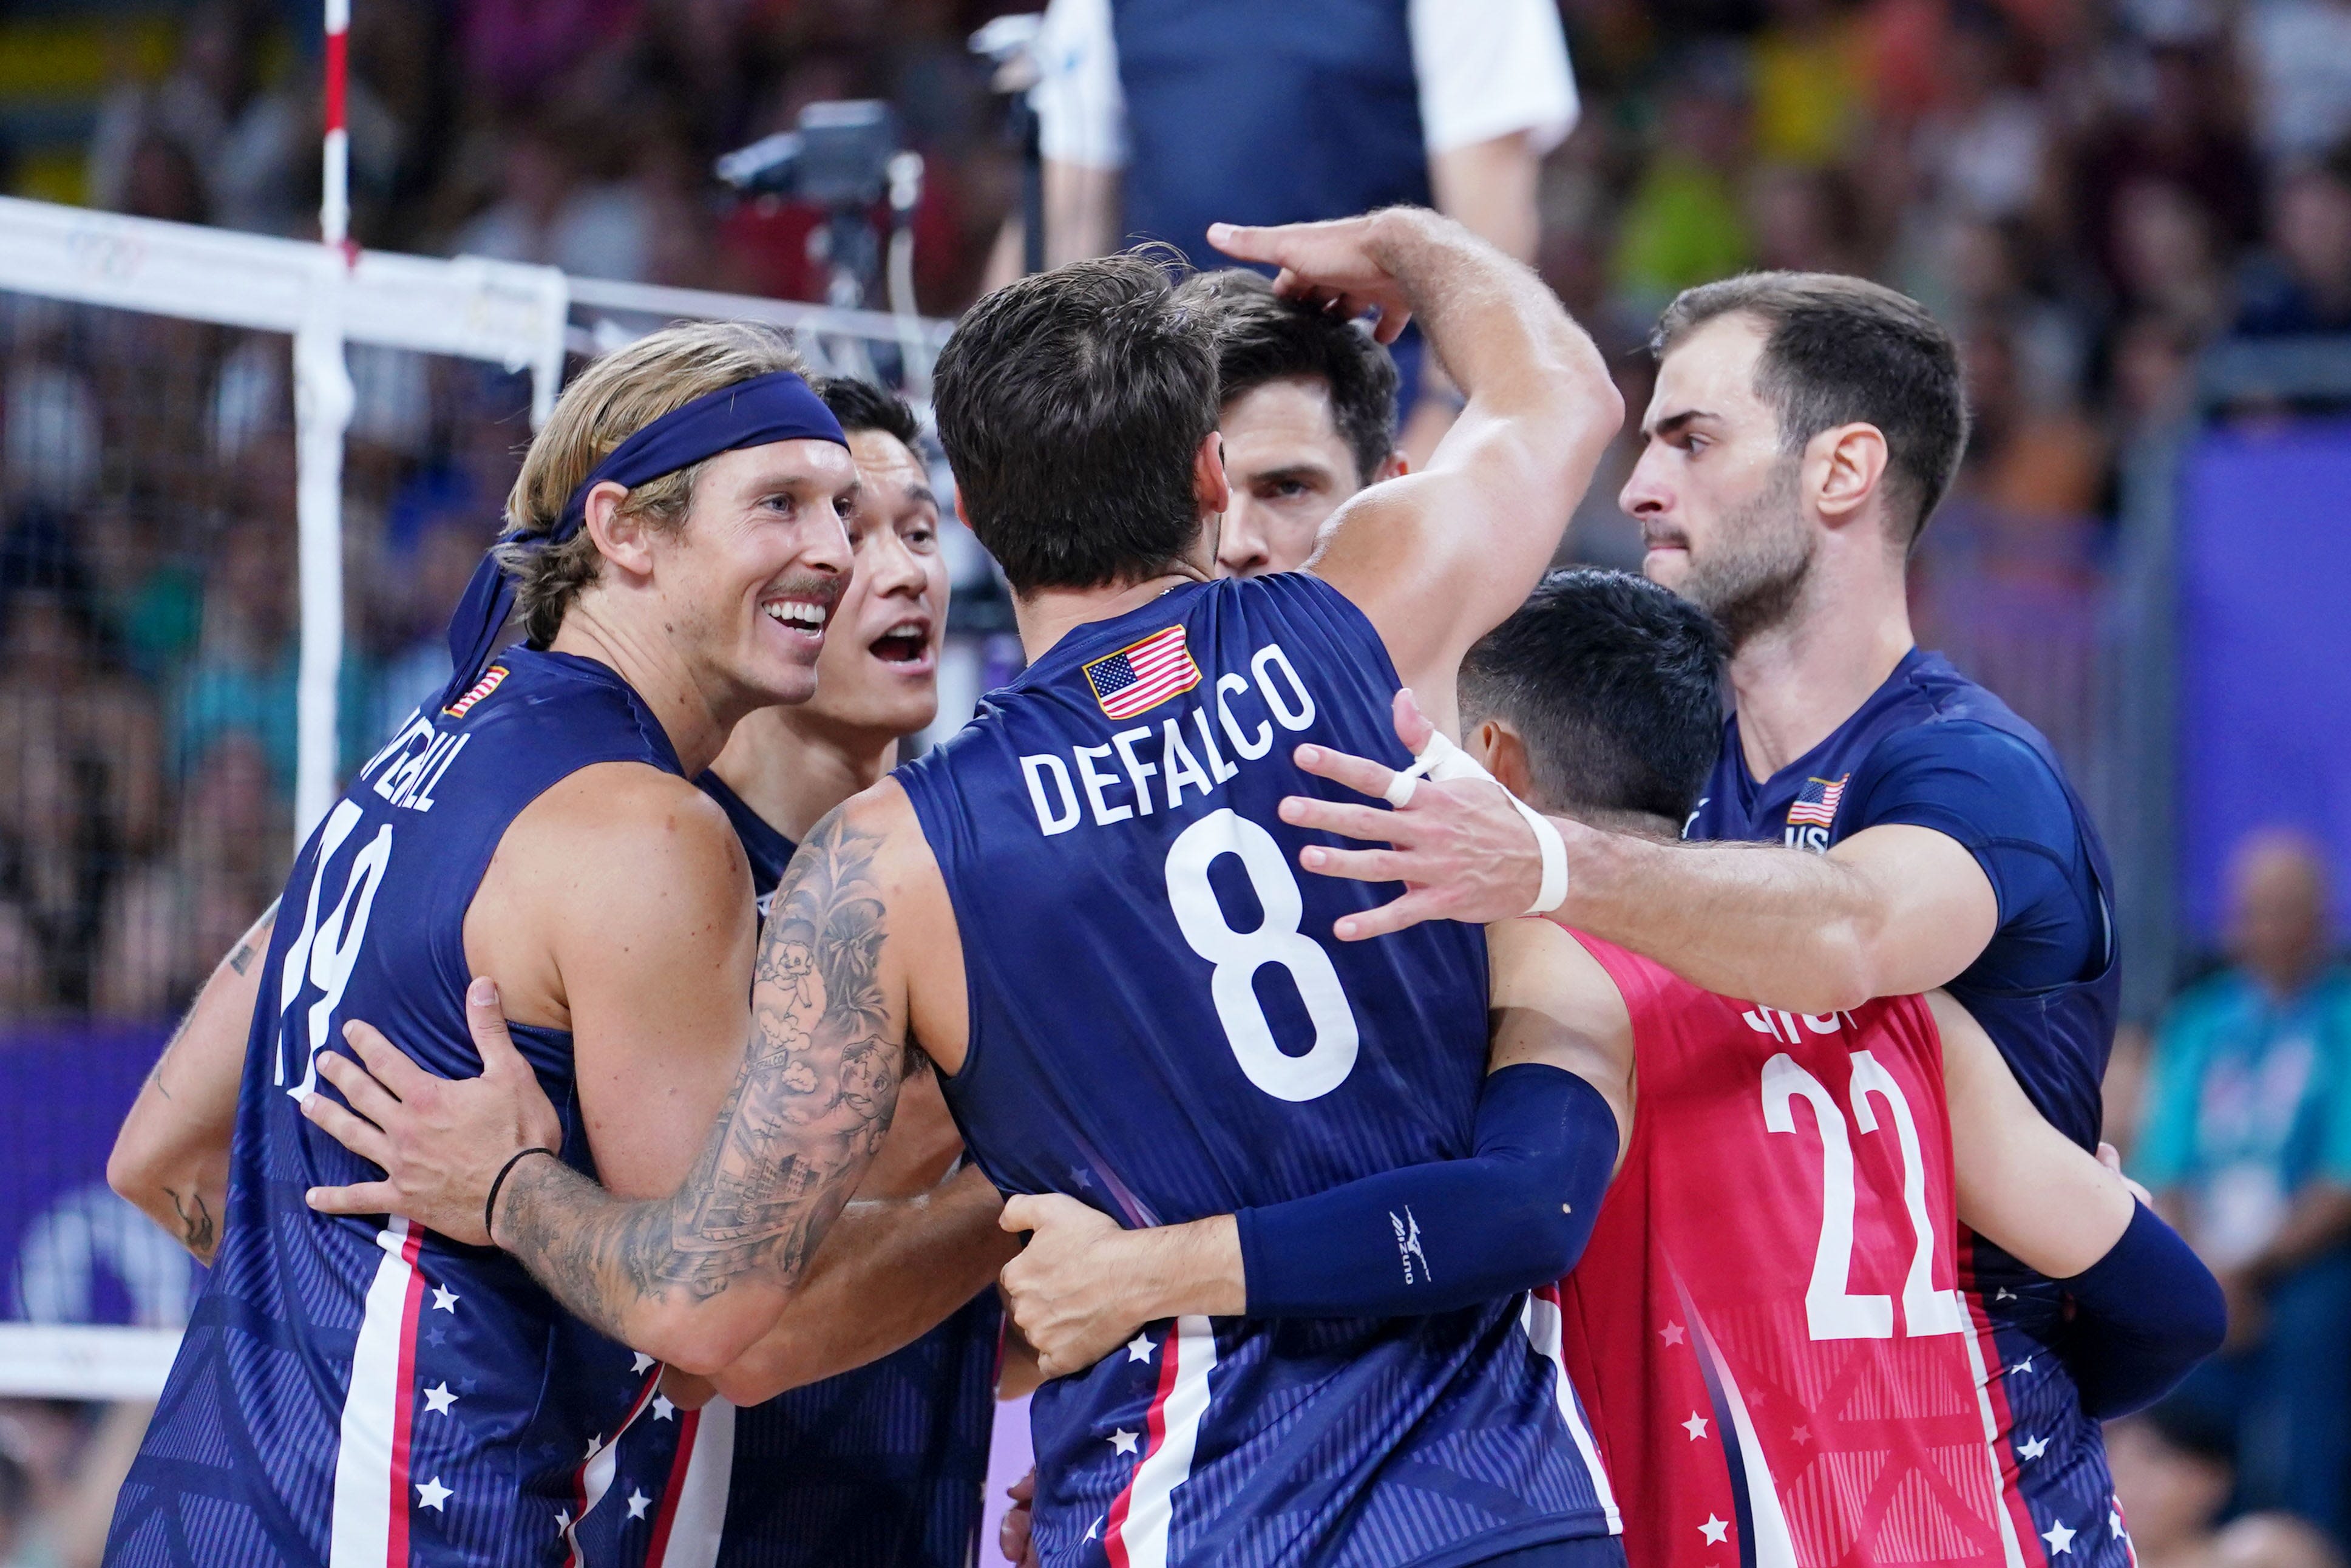 Redemption tour for USA men's volleyball off to a good start at Paris Olympics